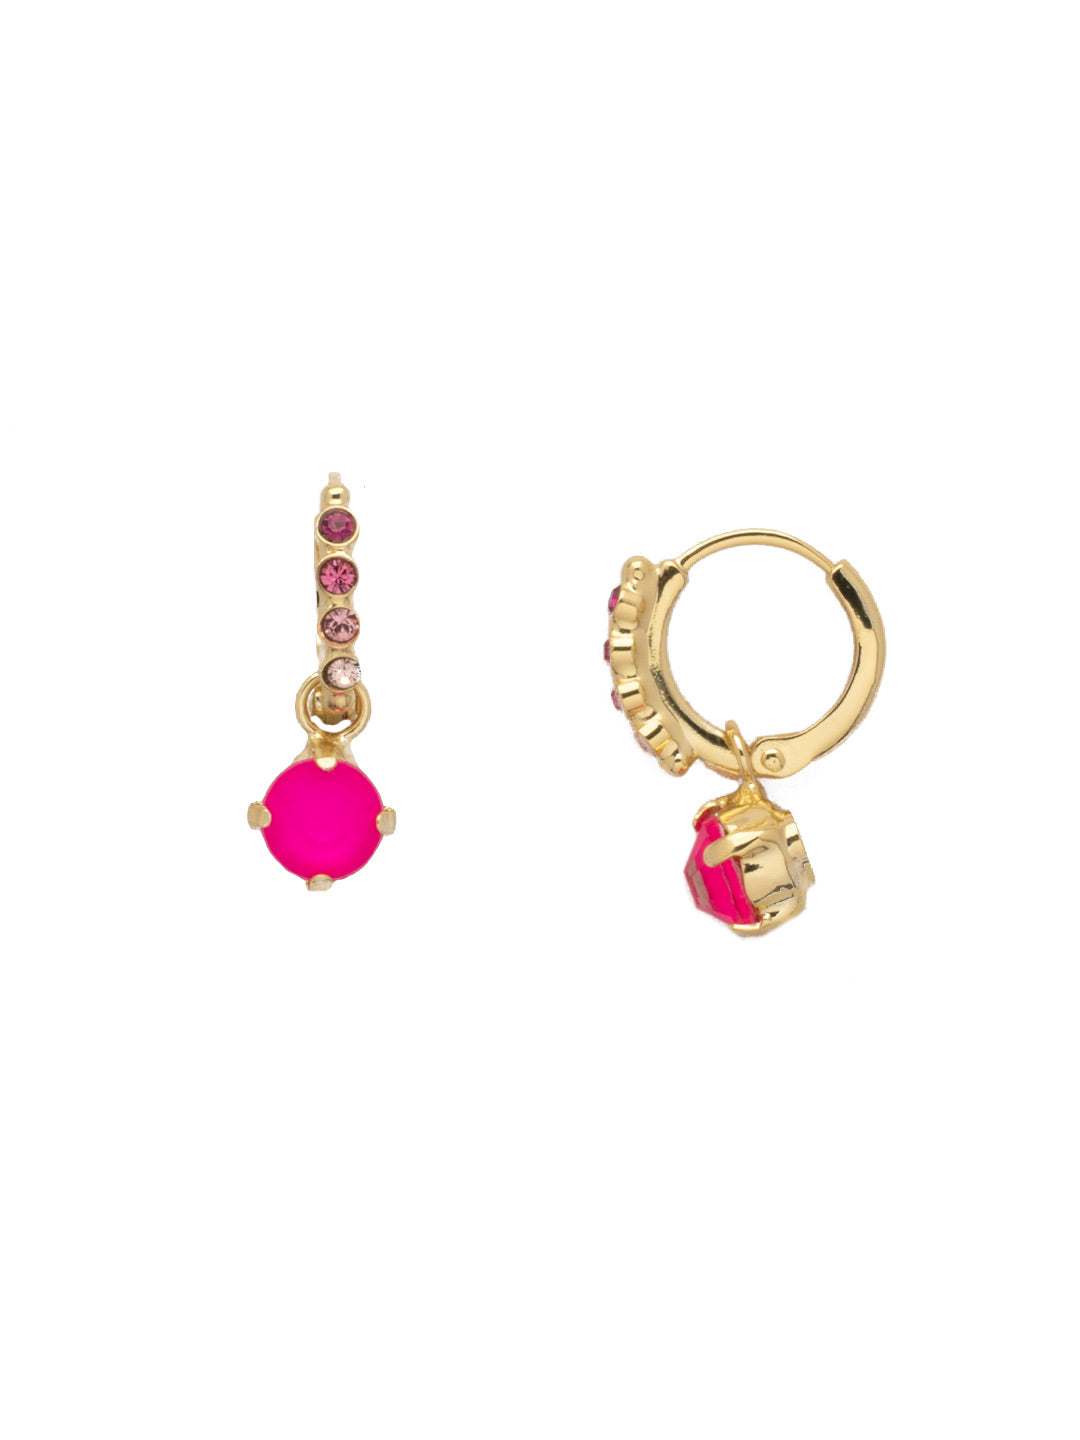 Crystal Stud Embellished Huggie Hoop Earrings - EFN7BGBFL - <p>The Crystal Stud Embellished Huggie Hoop Earrings feature a single round cut crystal stud dangling from a small crystal-embellished huggie hoop. From Sorrelli's Big Flirt collection in our Bright Gold-tone finish.</p>